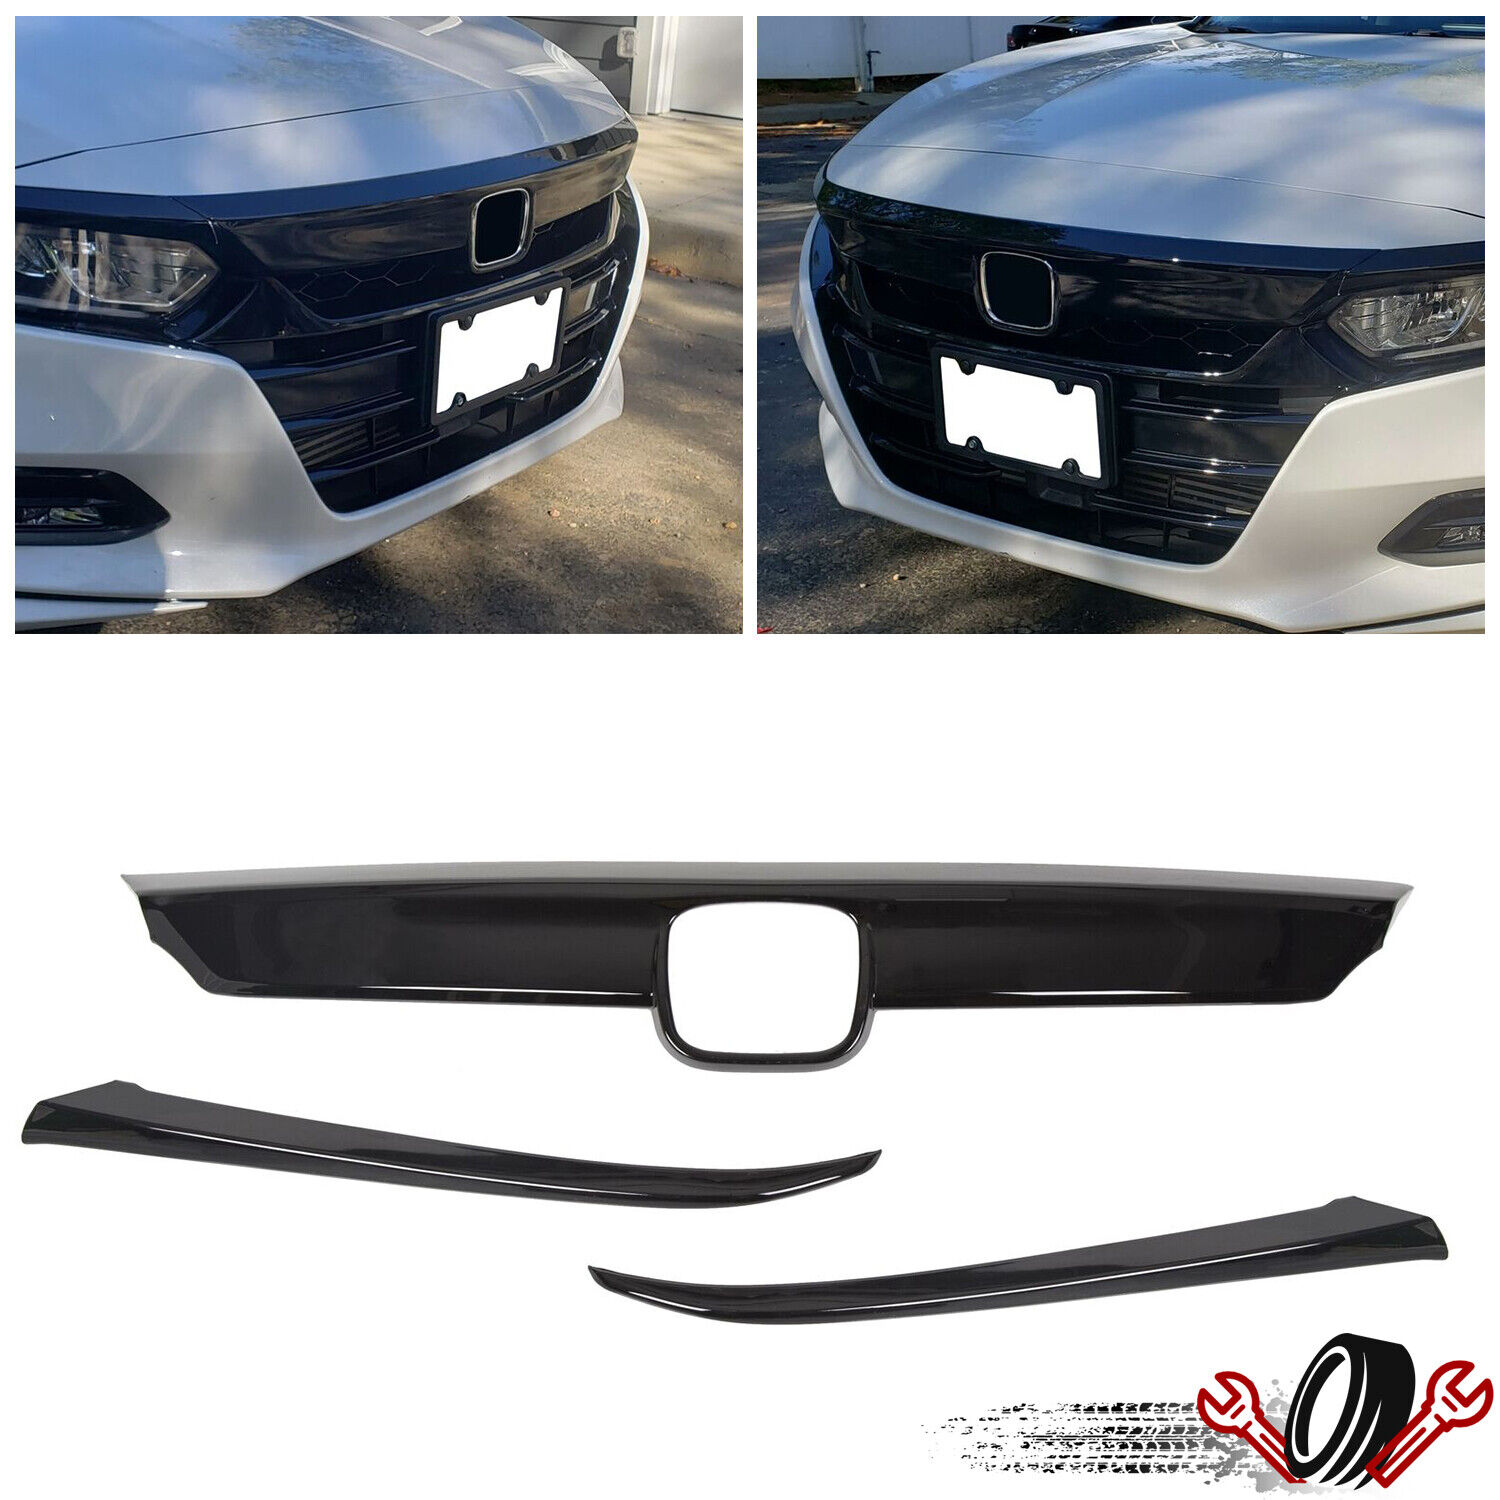 ABS Glossy Black Lip Front Grille Cover Moulding Trim For Honda Accord 2018-2020